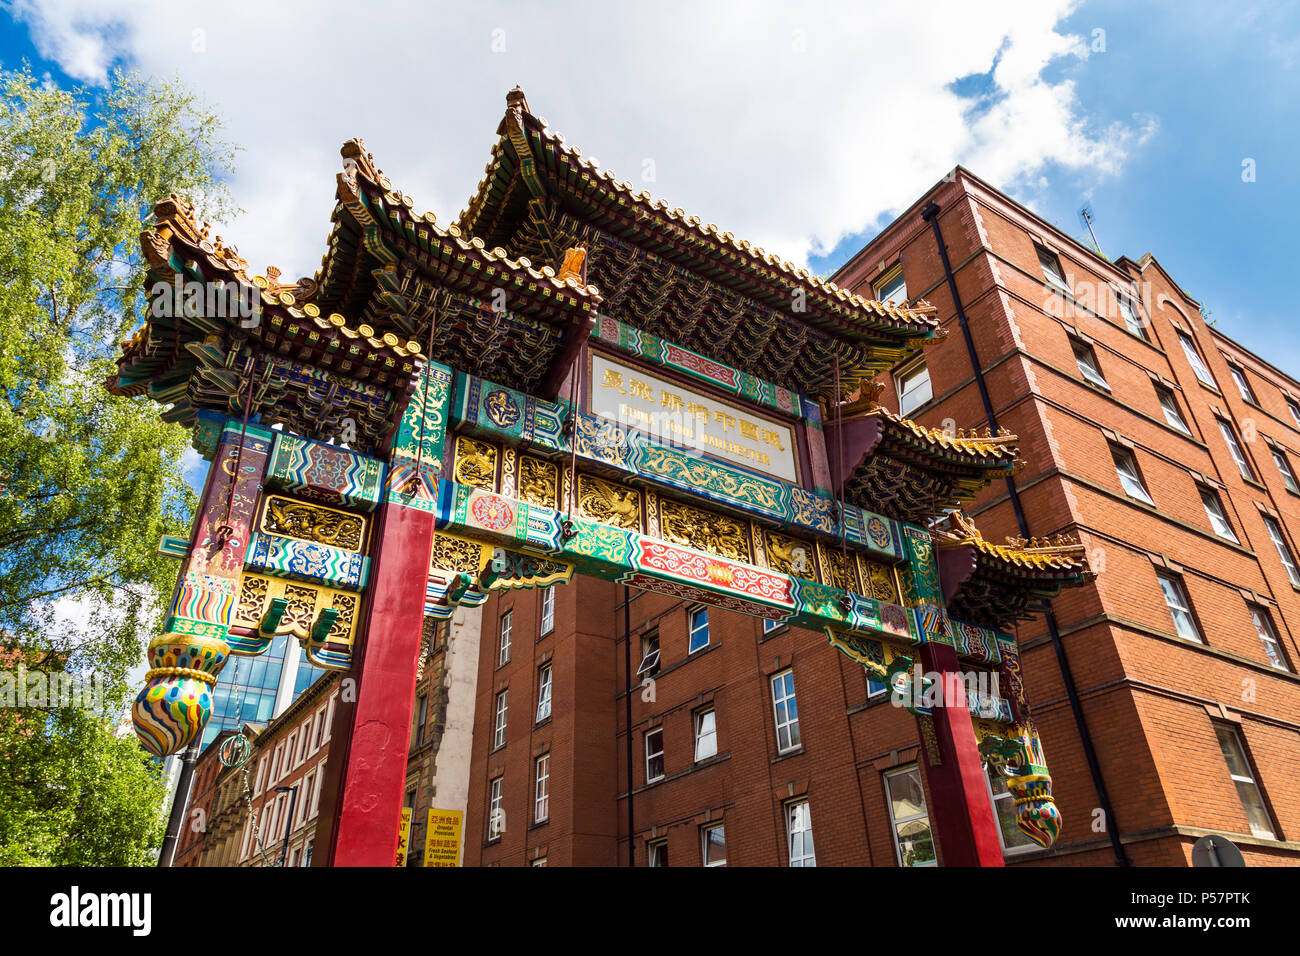 Chinatown gate, great imperial archway gifted from Beijing, Manchester, UK Stock Photo